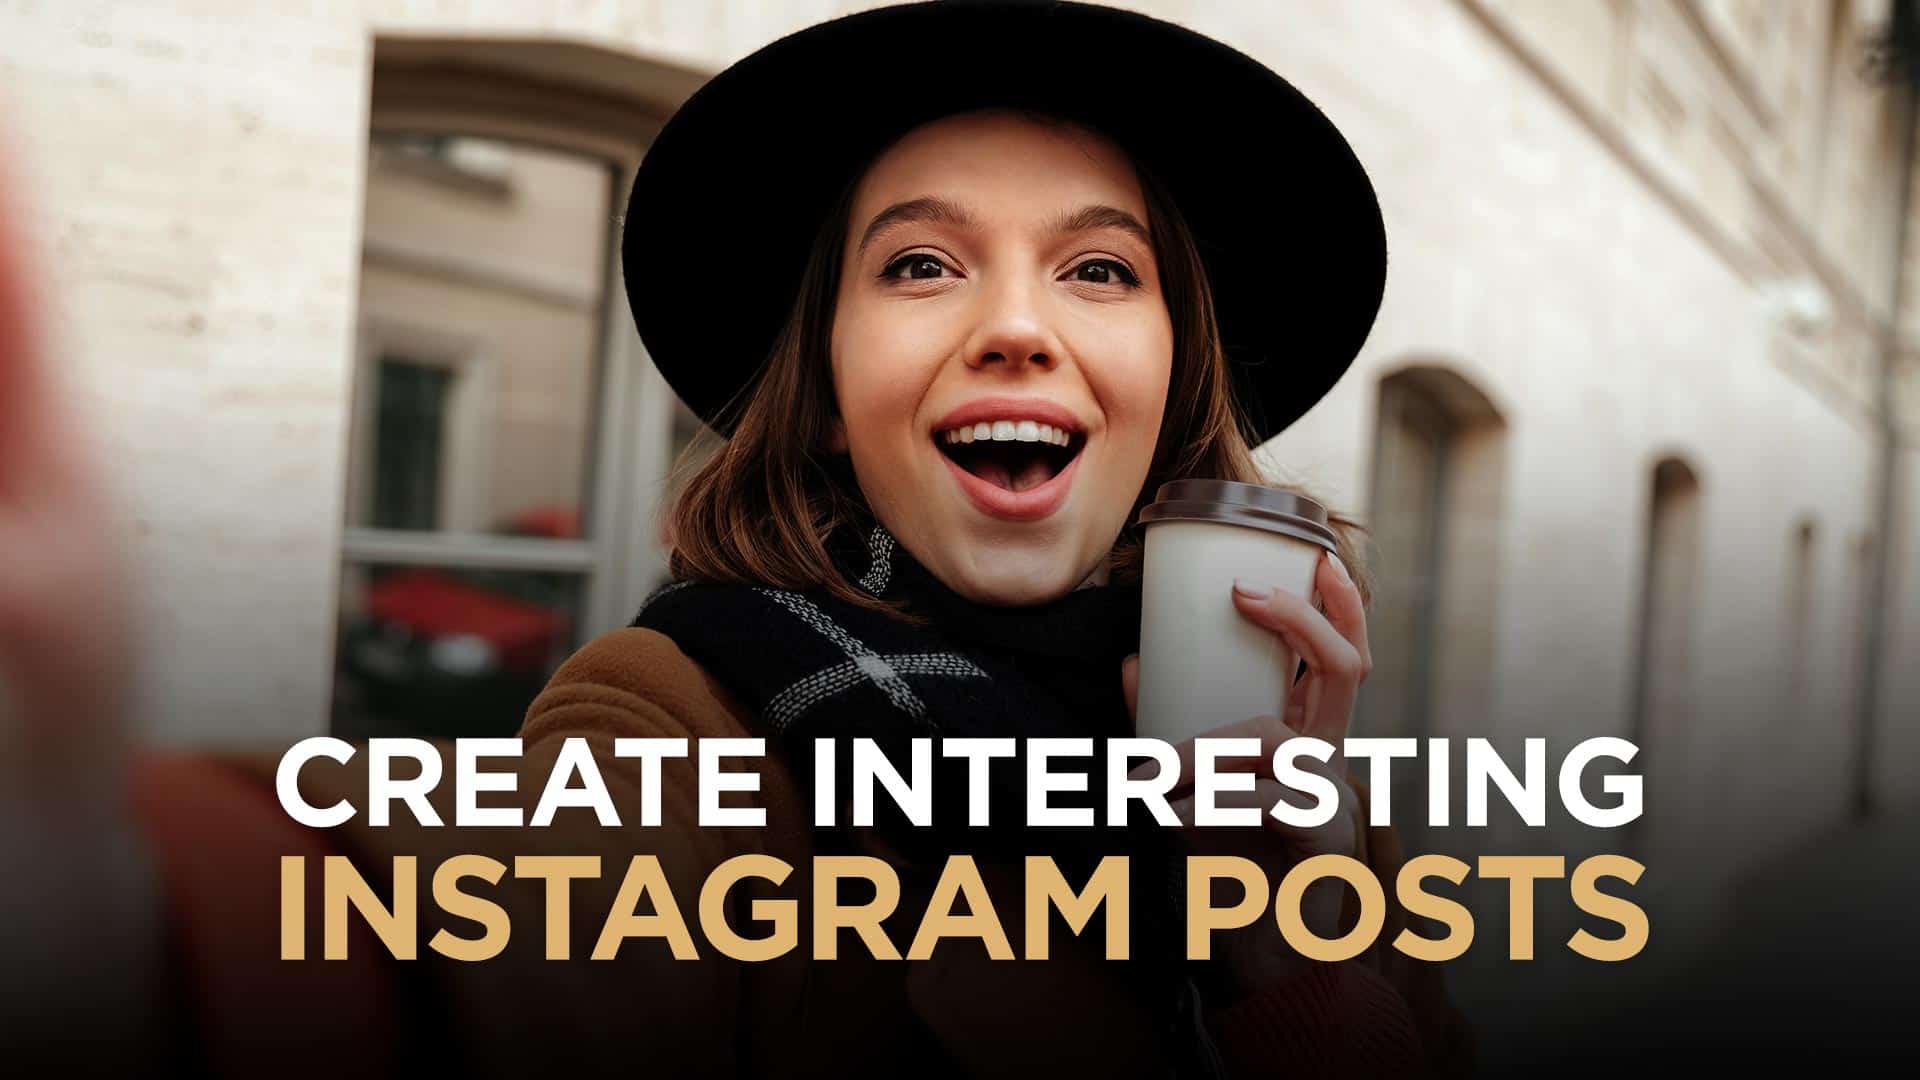 IG-How-To-Create-Interesting-Instagram-Posts-That-Keep-People-On-Your-Page